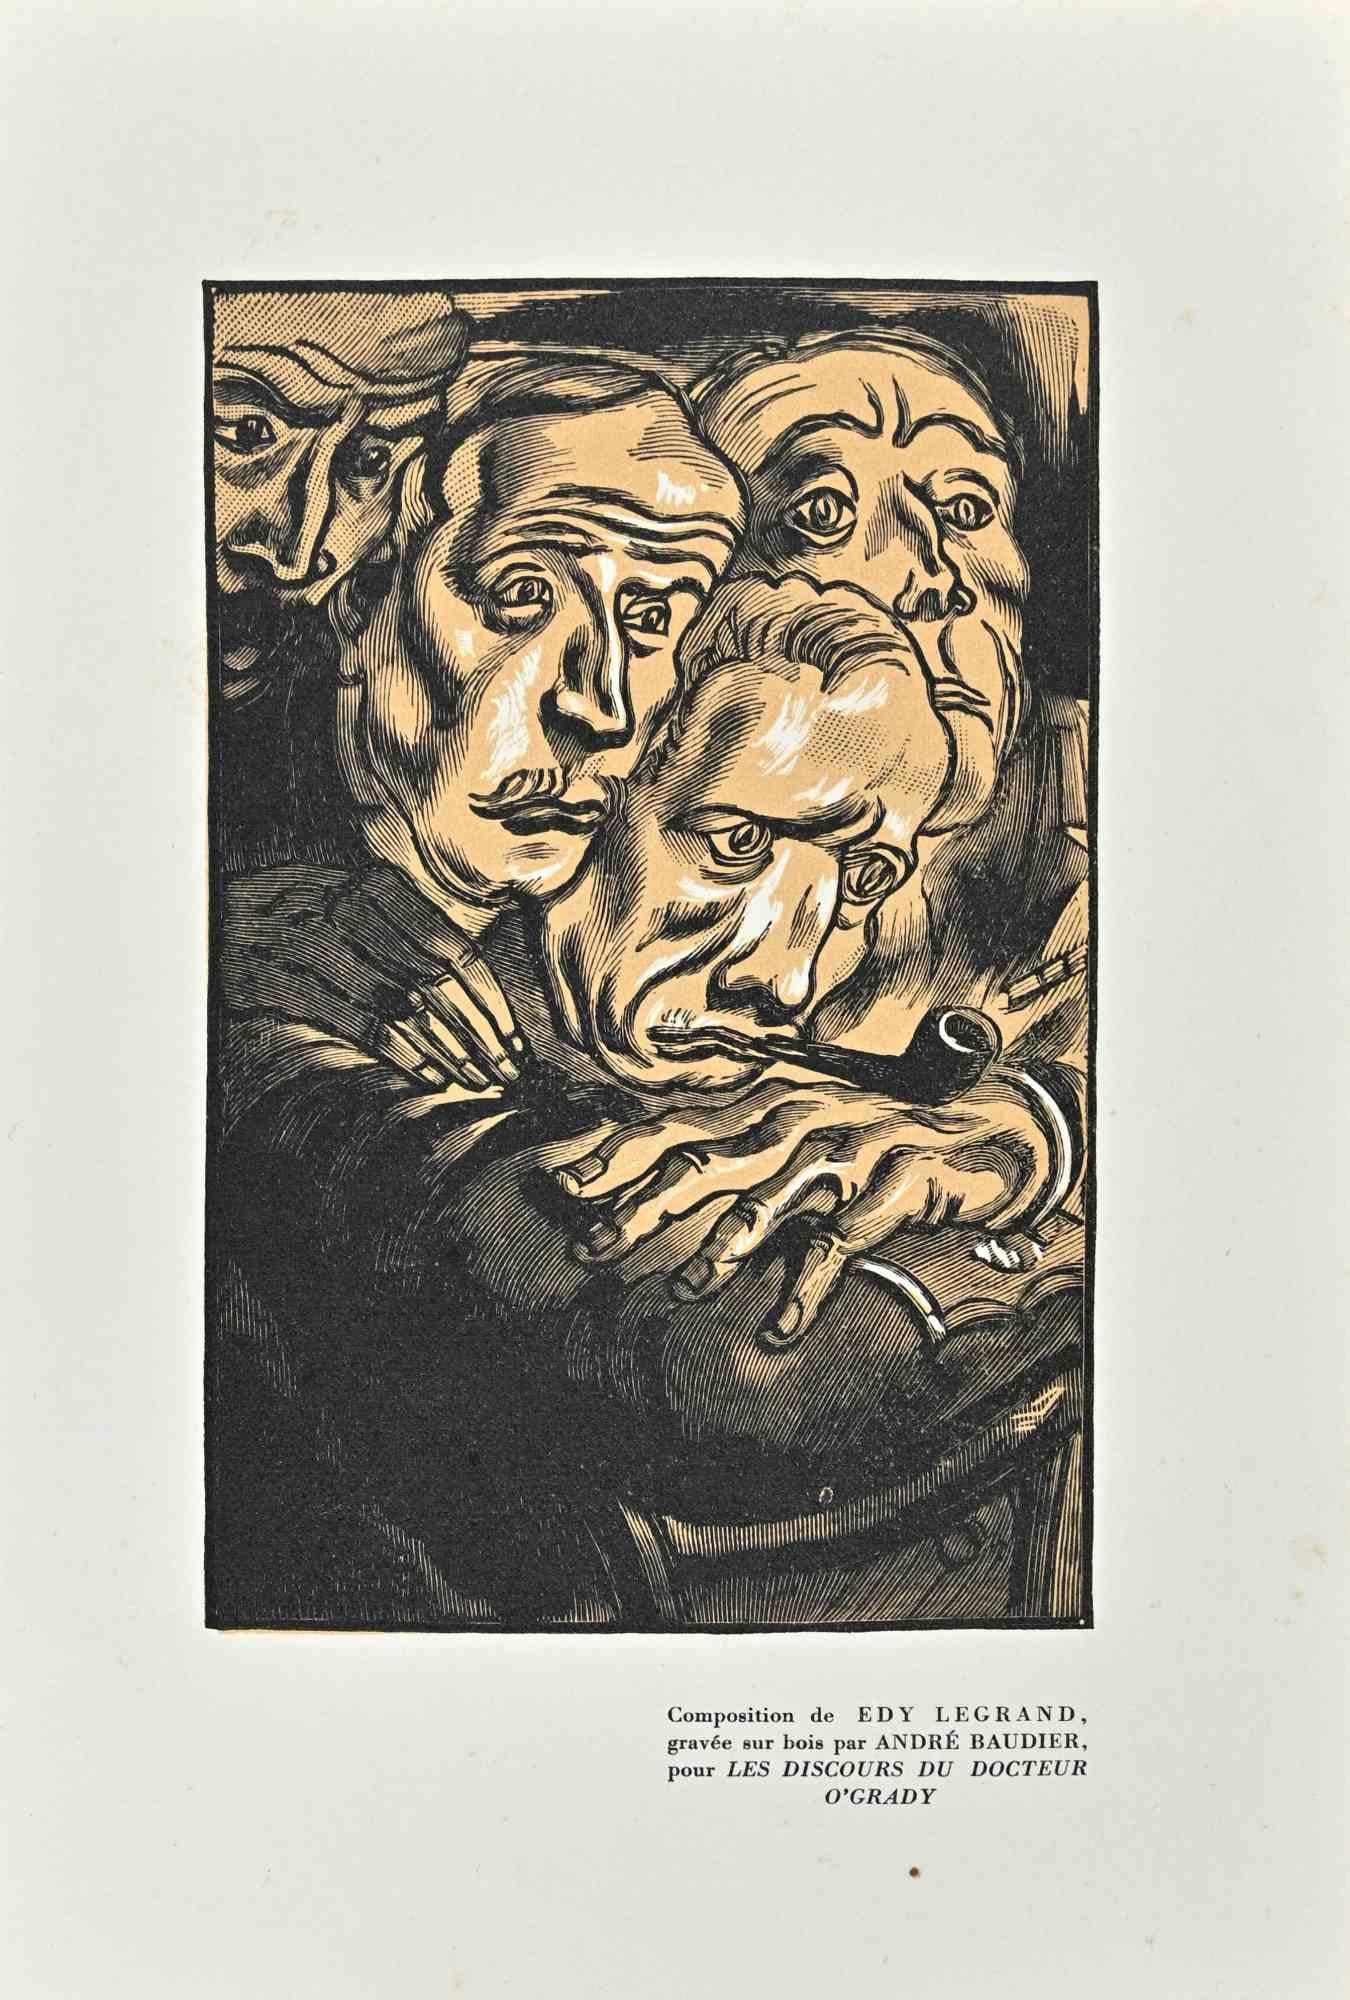 The Misery - Original Woodcut print by André Baudier - 1930s